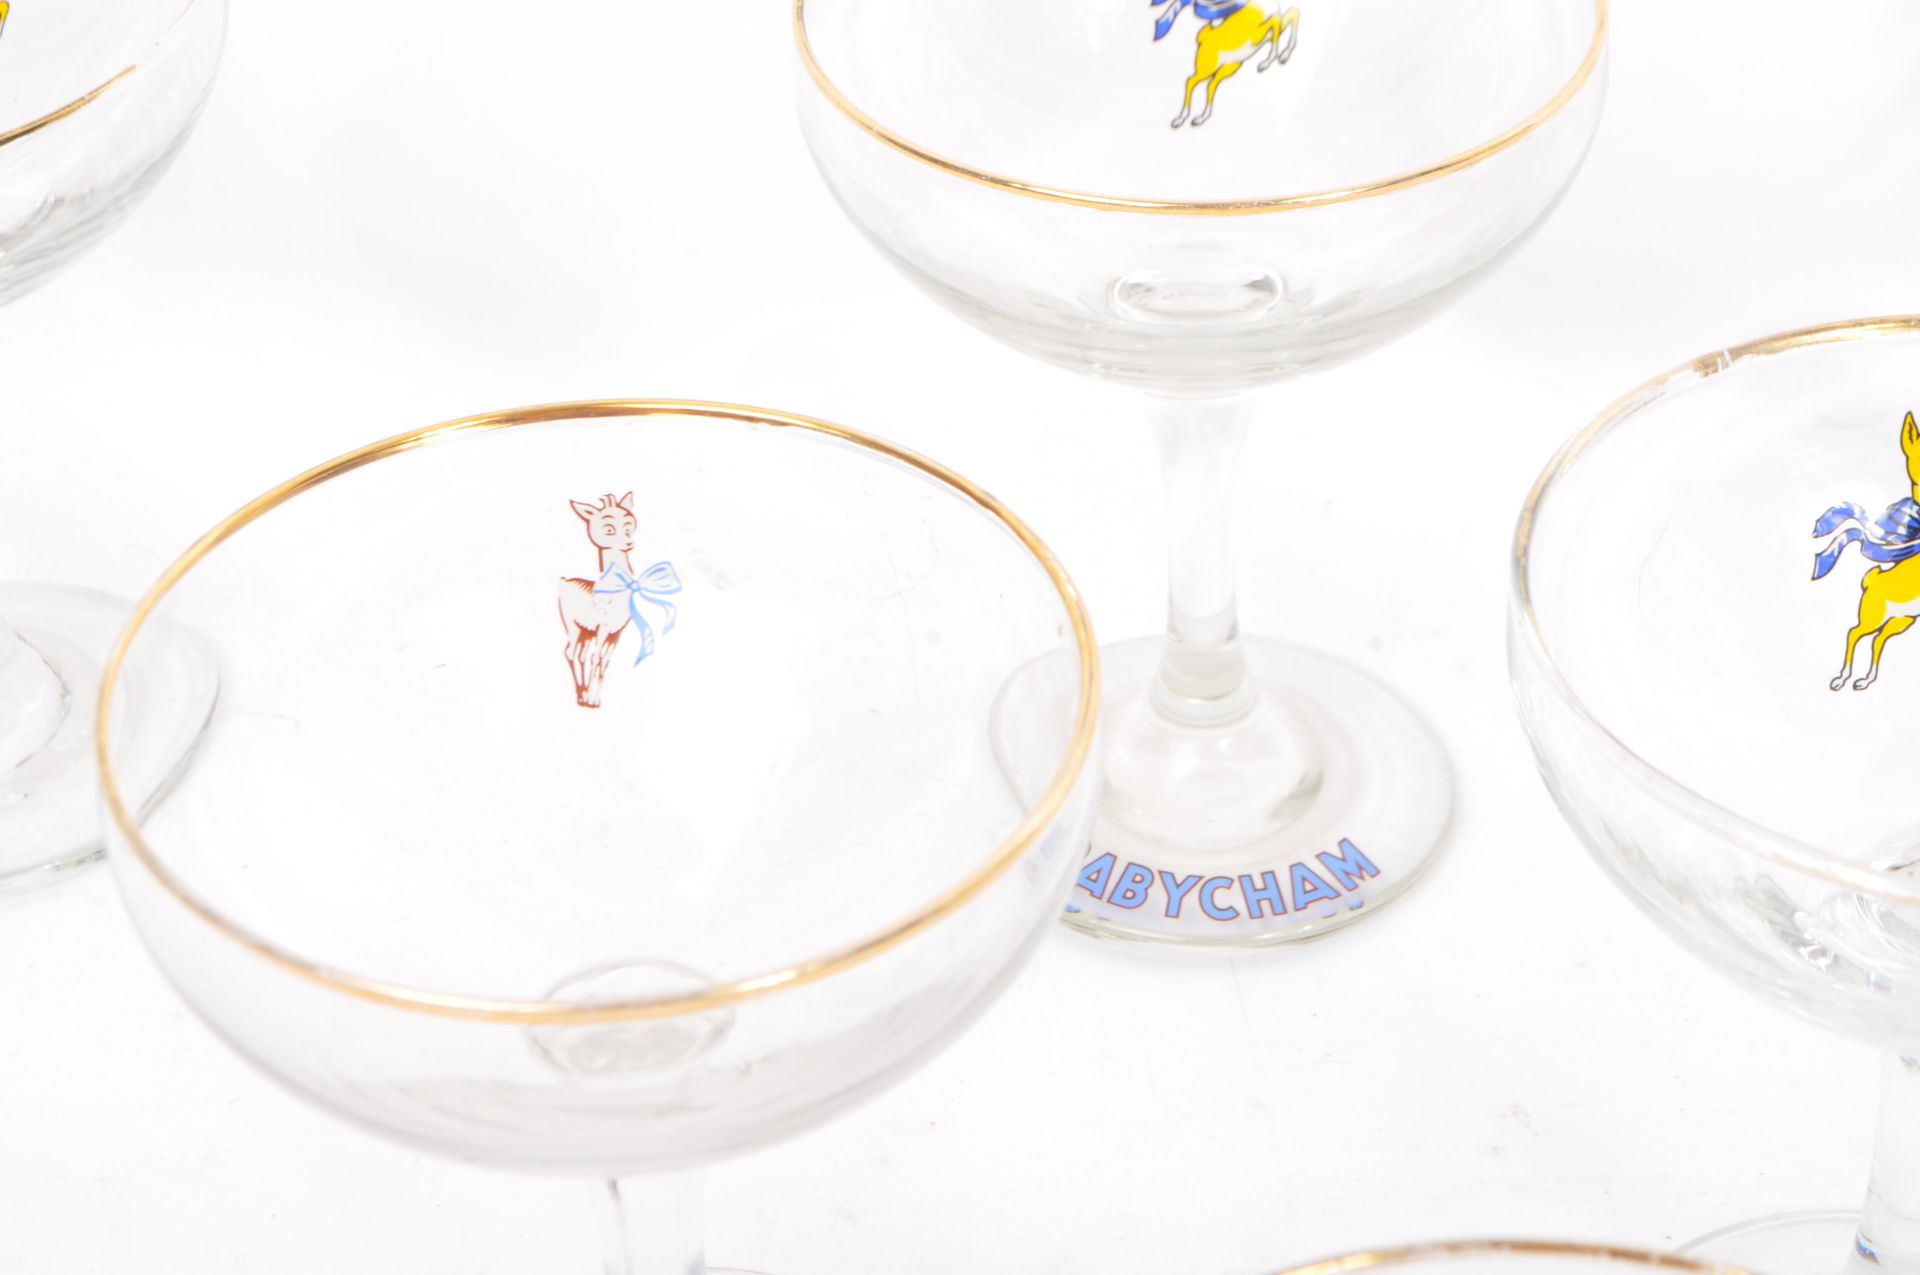 COLLECTION OF VINTAGE BABYCHAM CHAMPAGNE COUPE GLASSES - Bild 5 aus 6